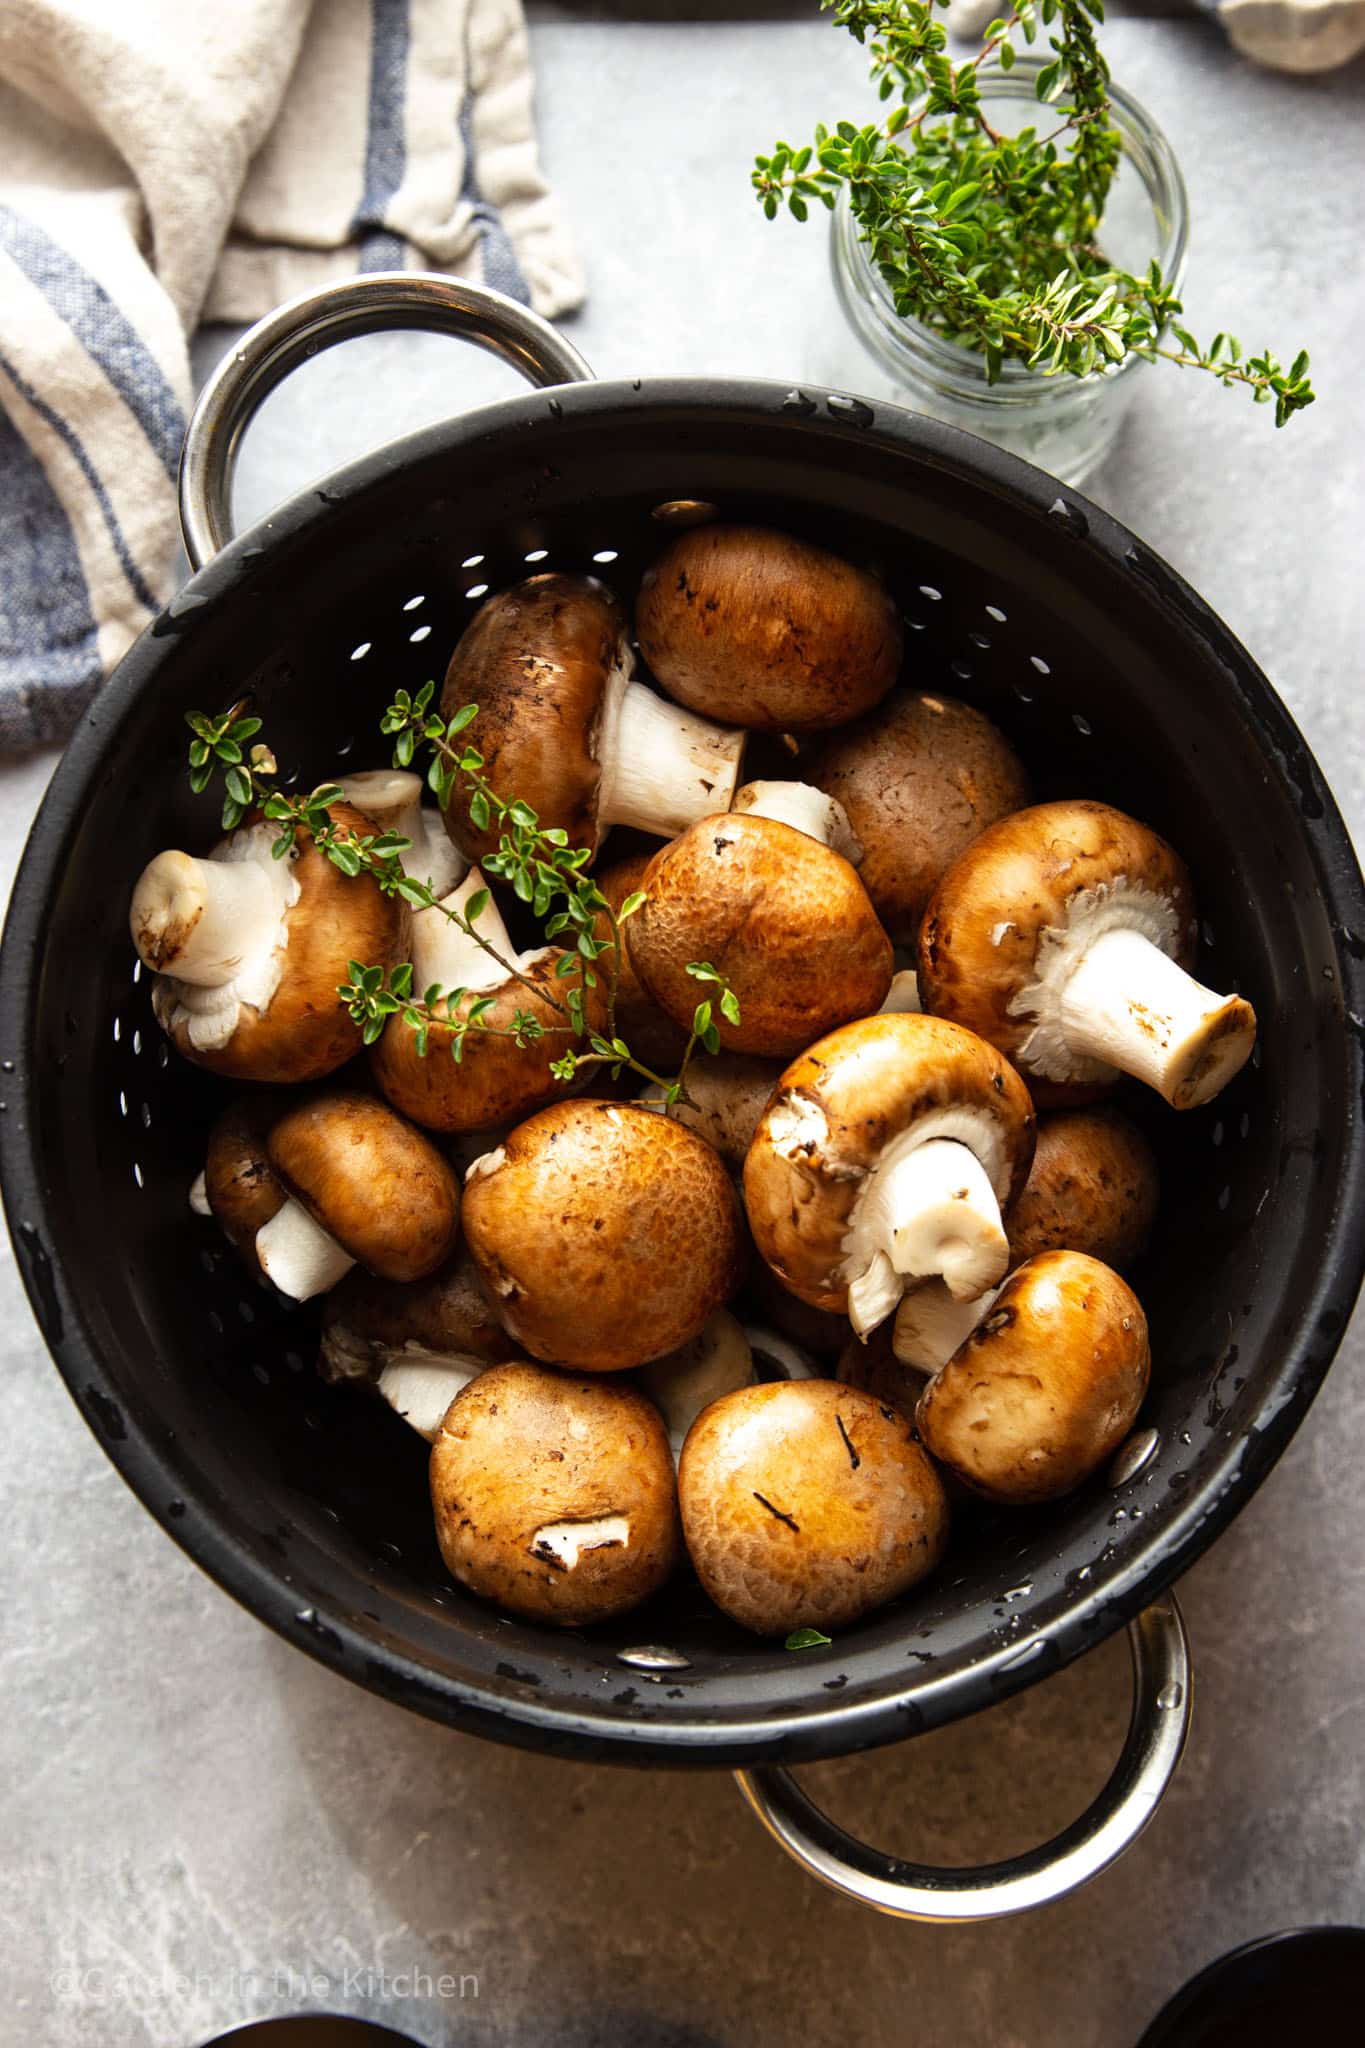 Rinsed mushrooms in a black strainer. A sprig of fresh thyme on top.